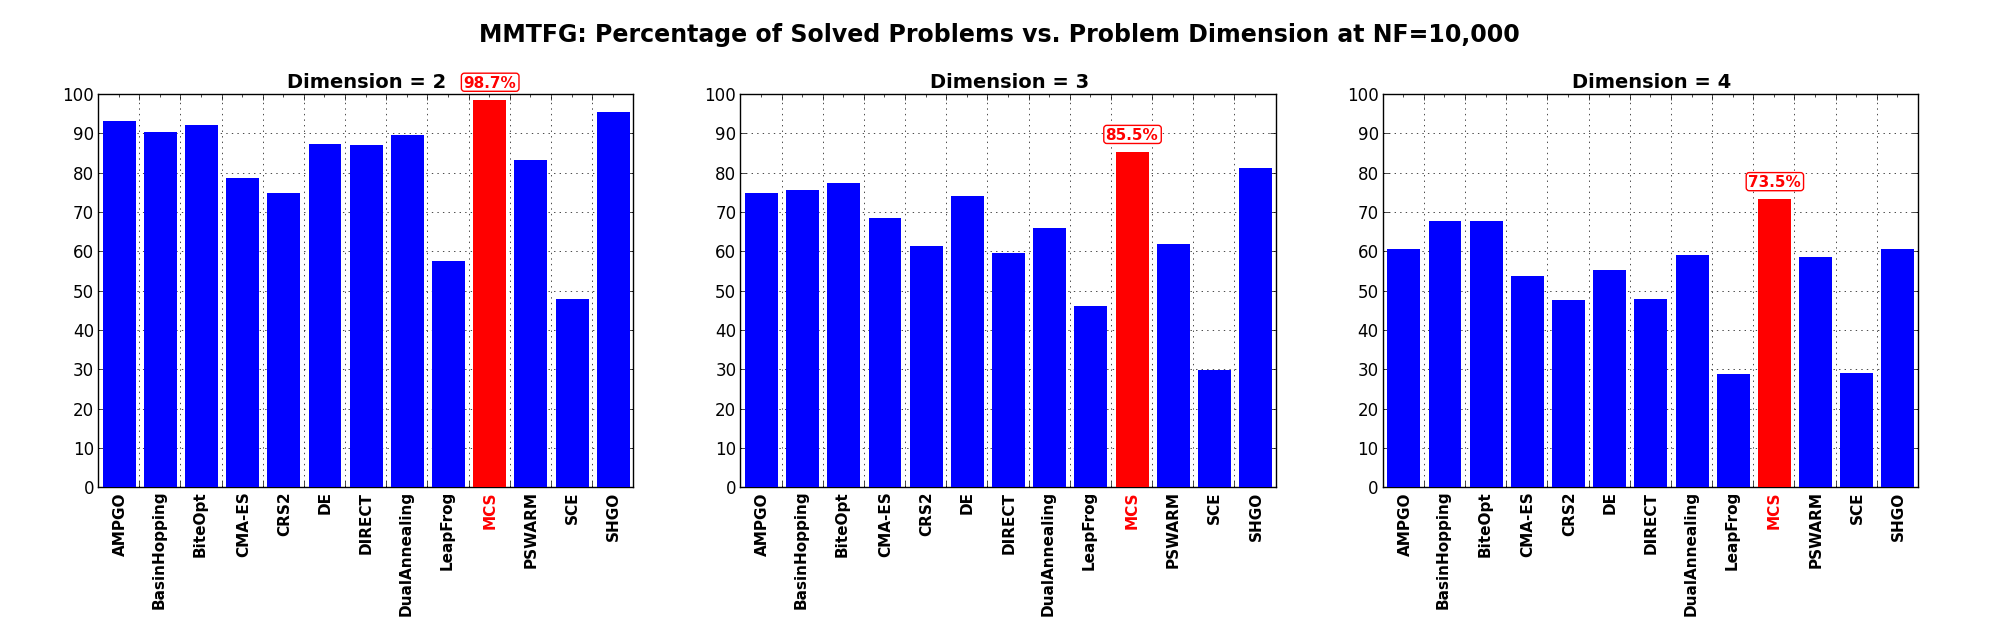 Percentage of problems solved as a function of problem dimension at :math:`NF = 10,000`